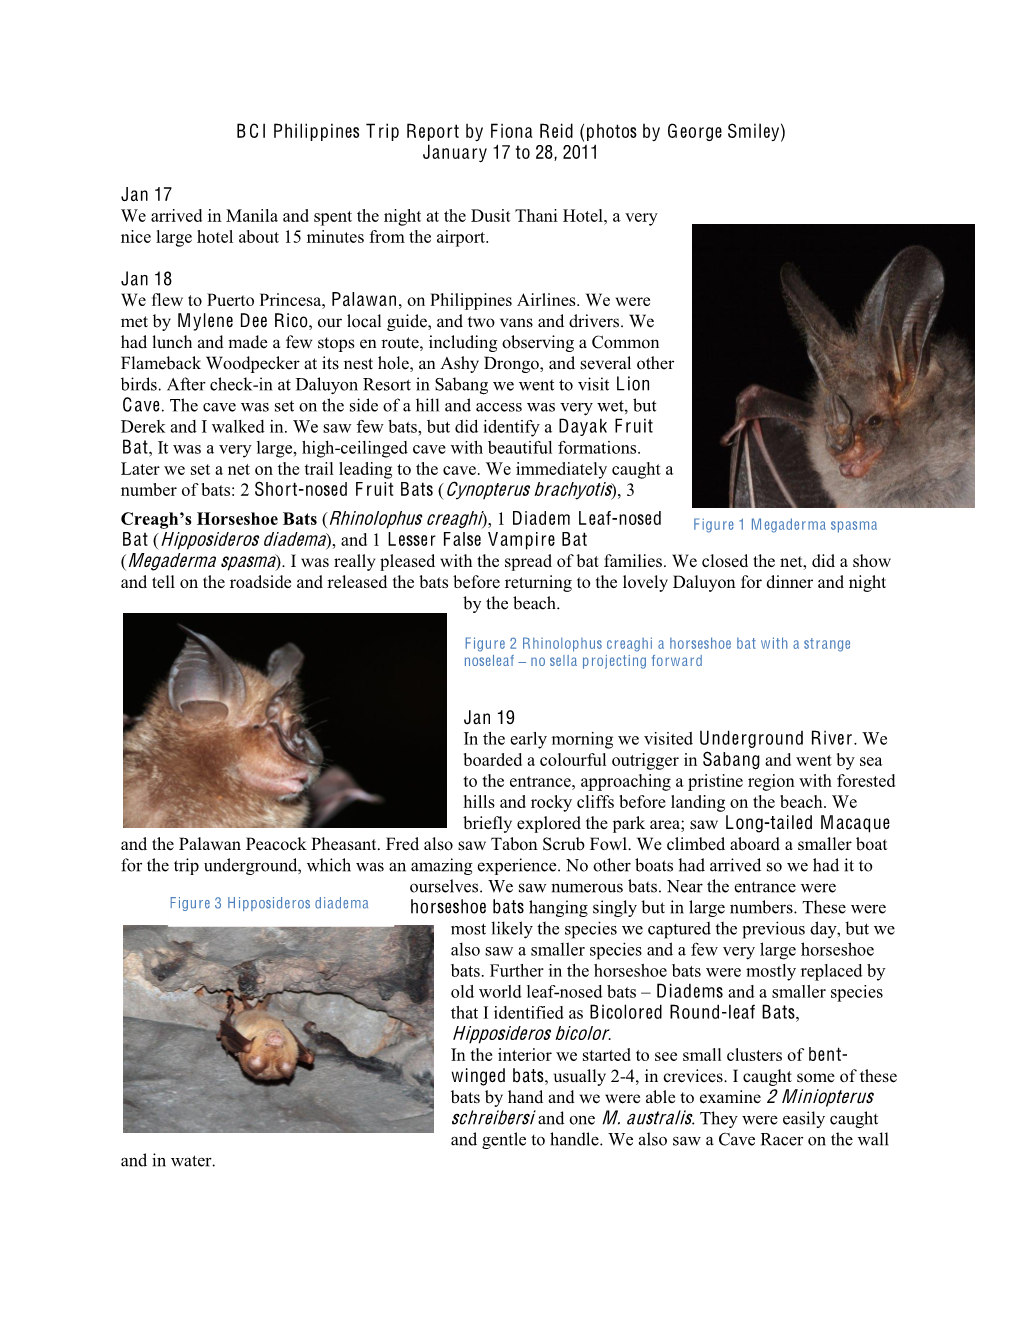 Hipposideros Bicolor. in the Interior We Started to See Small Clusters of Bent- Winged Bats, Usually 2-4, in Crevices